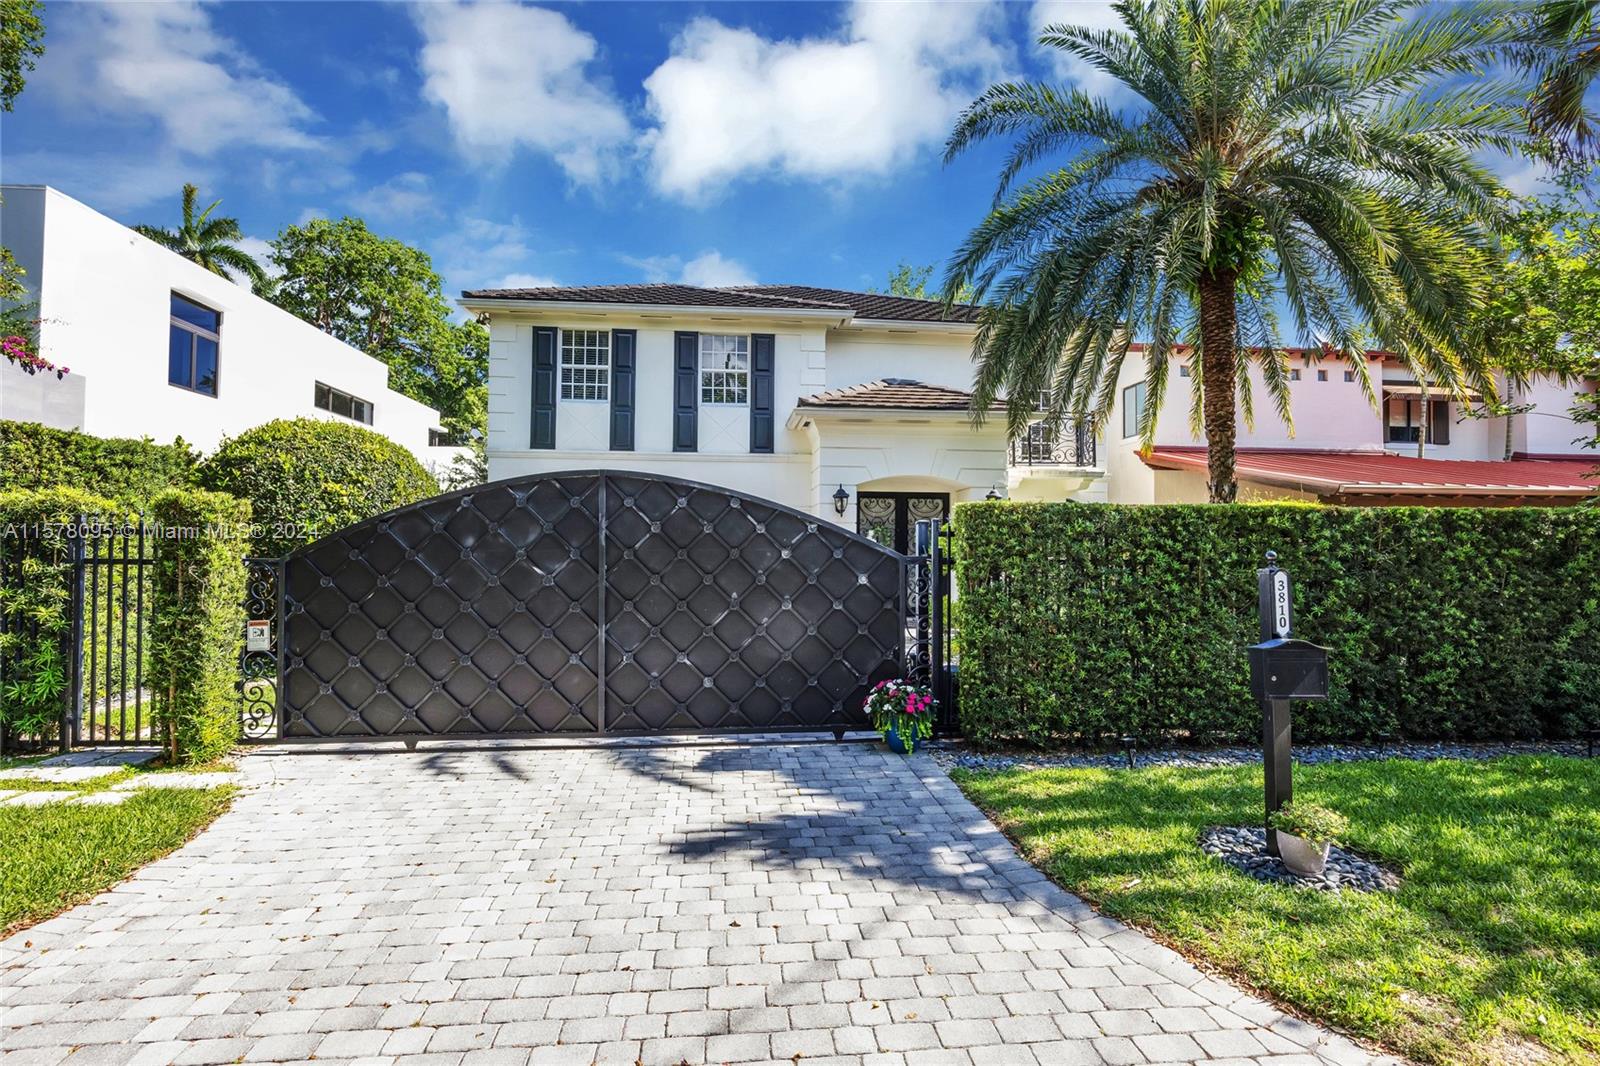 Exquisite, ultra-private gated retreat in prestigious South Coconut Grove. Enter into light-filled living spaces w/ volume ceilings and marble & wood flooring throughout. Stunning, updated kitchen features European style cabinetry, new Sub Zero & KitchenAid appliances + island & breakfast bar.  2nd level primary suite offers dual walk-in closets, office/gym space, balcony overlooking the lush grounds and a spa-like bath w/glass enclosed shower & soaking tub. Enjoy resort style outdoor living on the covered terrace & relax in the heated pool, surrounded by a magnificent tropical garden. Full-home generator & Smart Home systems. Furnishings negotiable. Walk to the Grove village’s boutiques, cafes, best private schools and bayfront parks & marinas. Minutes to downtown, MIA & the Beaches.